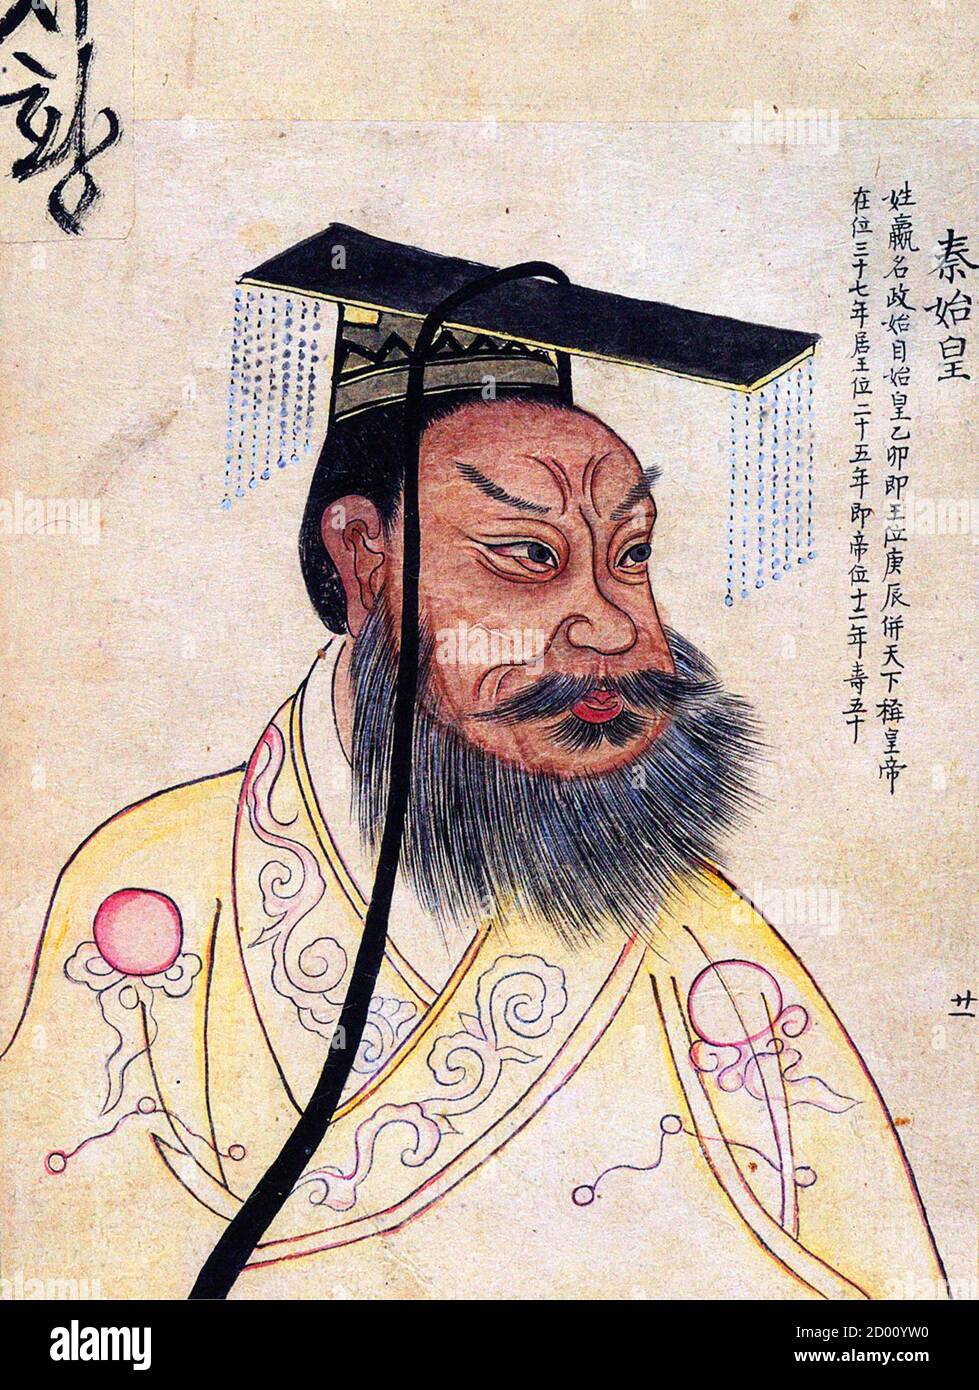 Qin Shi Huang (259 BC-210 BC). Portrait of the founder of the Qin dynasty and the first emperor of a unified China, 19th century illustration Stock Photo